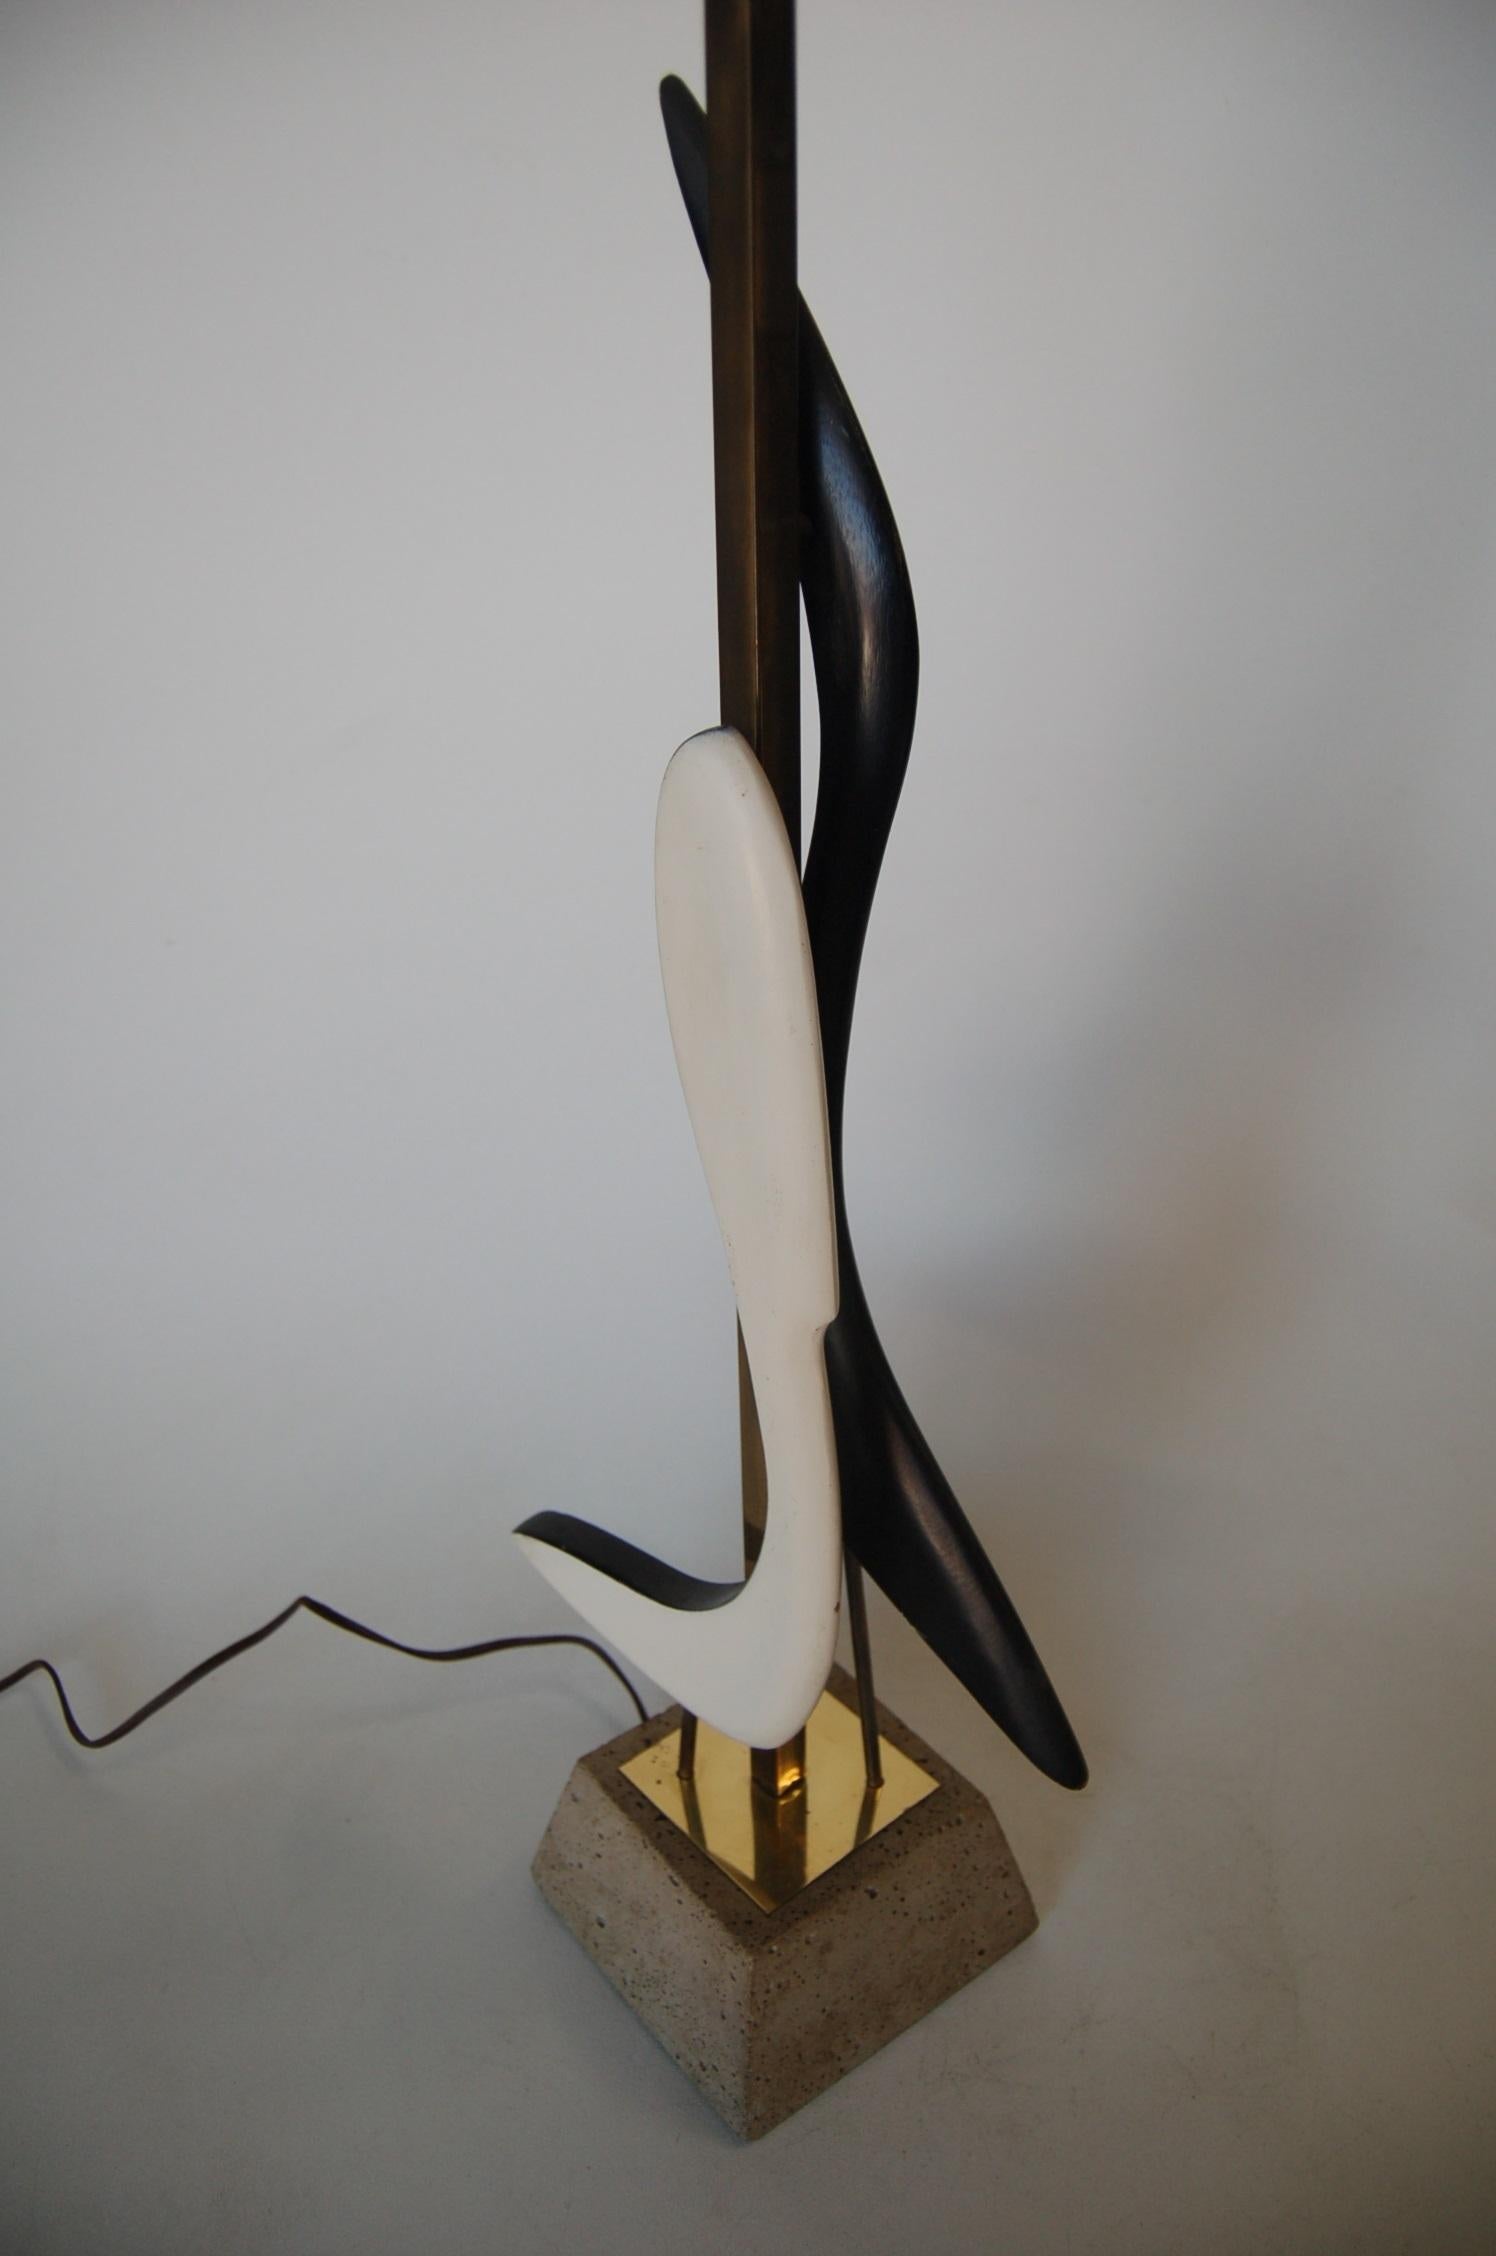 Mid-Century Modern black and white abstract sculptural table lamp on a concrete base with brass trim.

Measures: 9